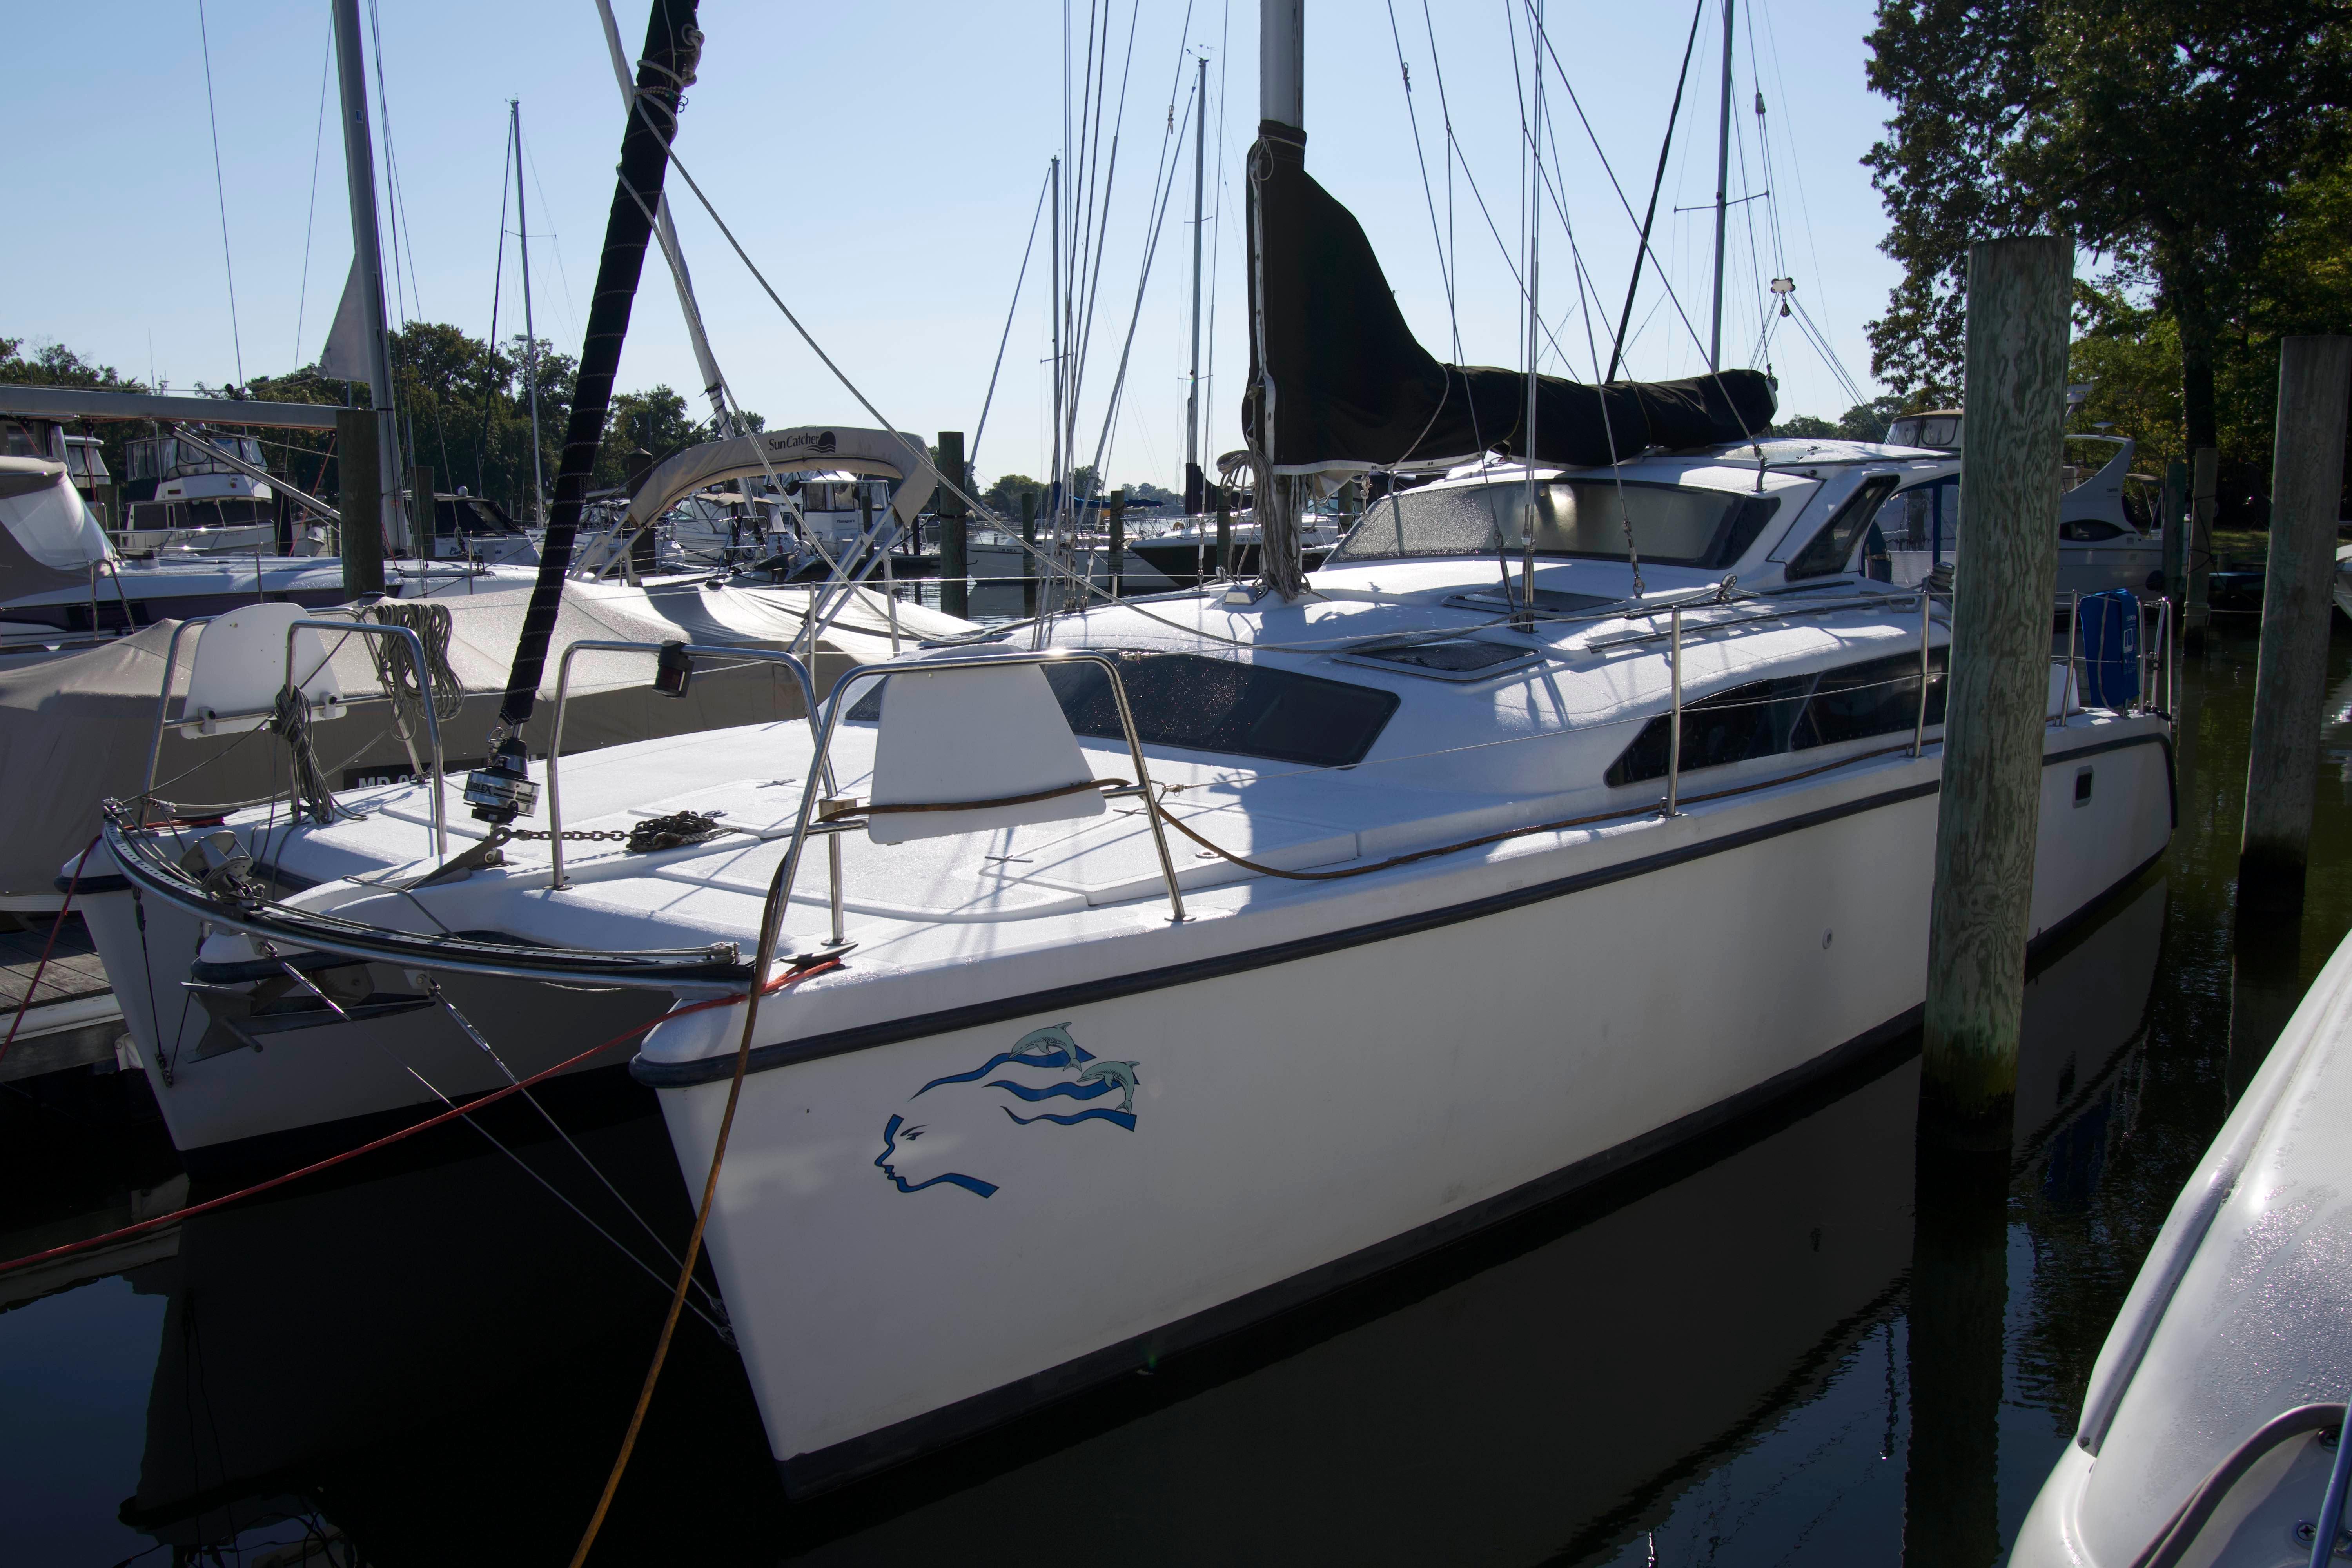 M 7364 RD Knot 10 Yacht Sales